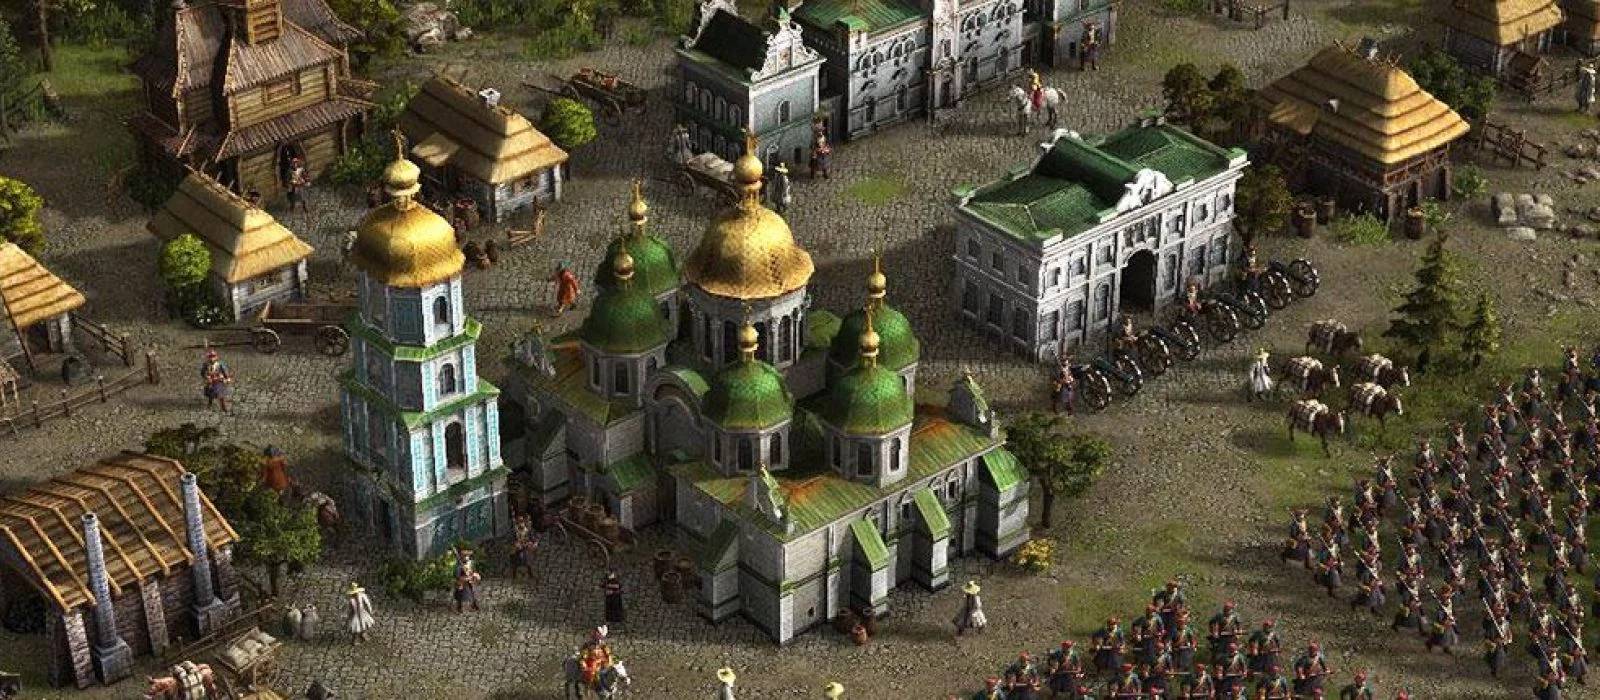 Game "Cossacks 3": How to solve launch, performance, and interface problems. - photo №79249